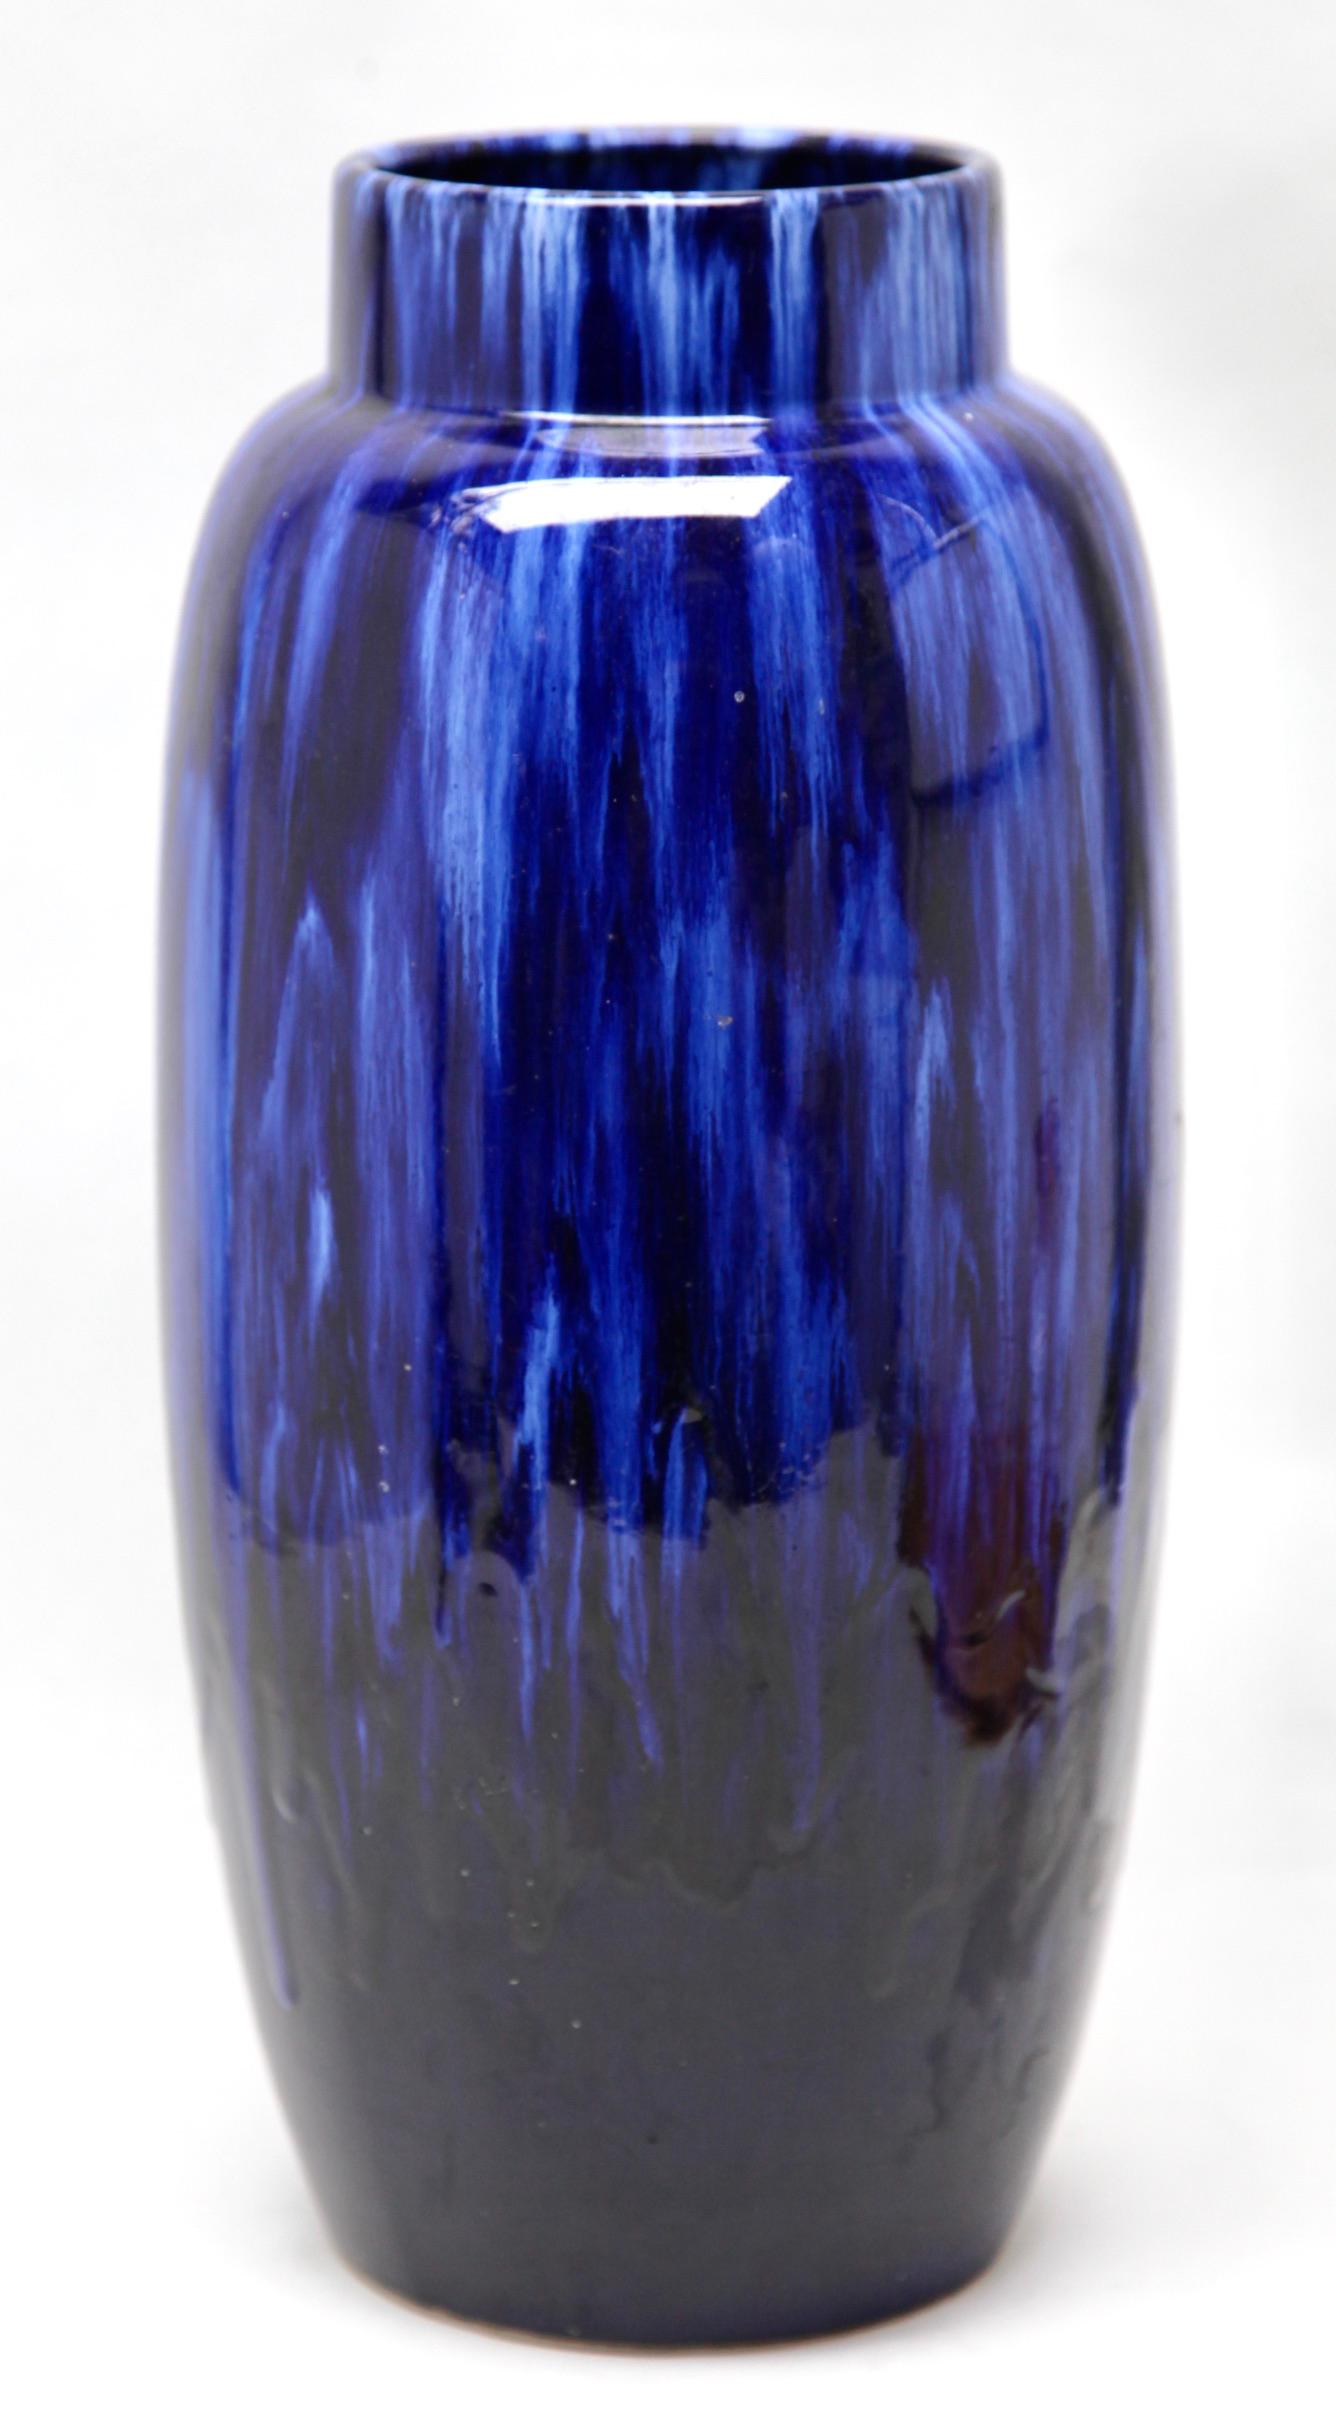 Vintage Scheurich vase in blue or black drip glaze featuring the indented
On close inspection the glaze includes flecks black and sea-blue which give greater depth to the surfaces.

Please don't hesitate to get in touch with any further